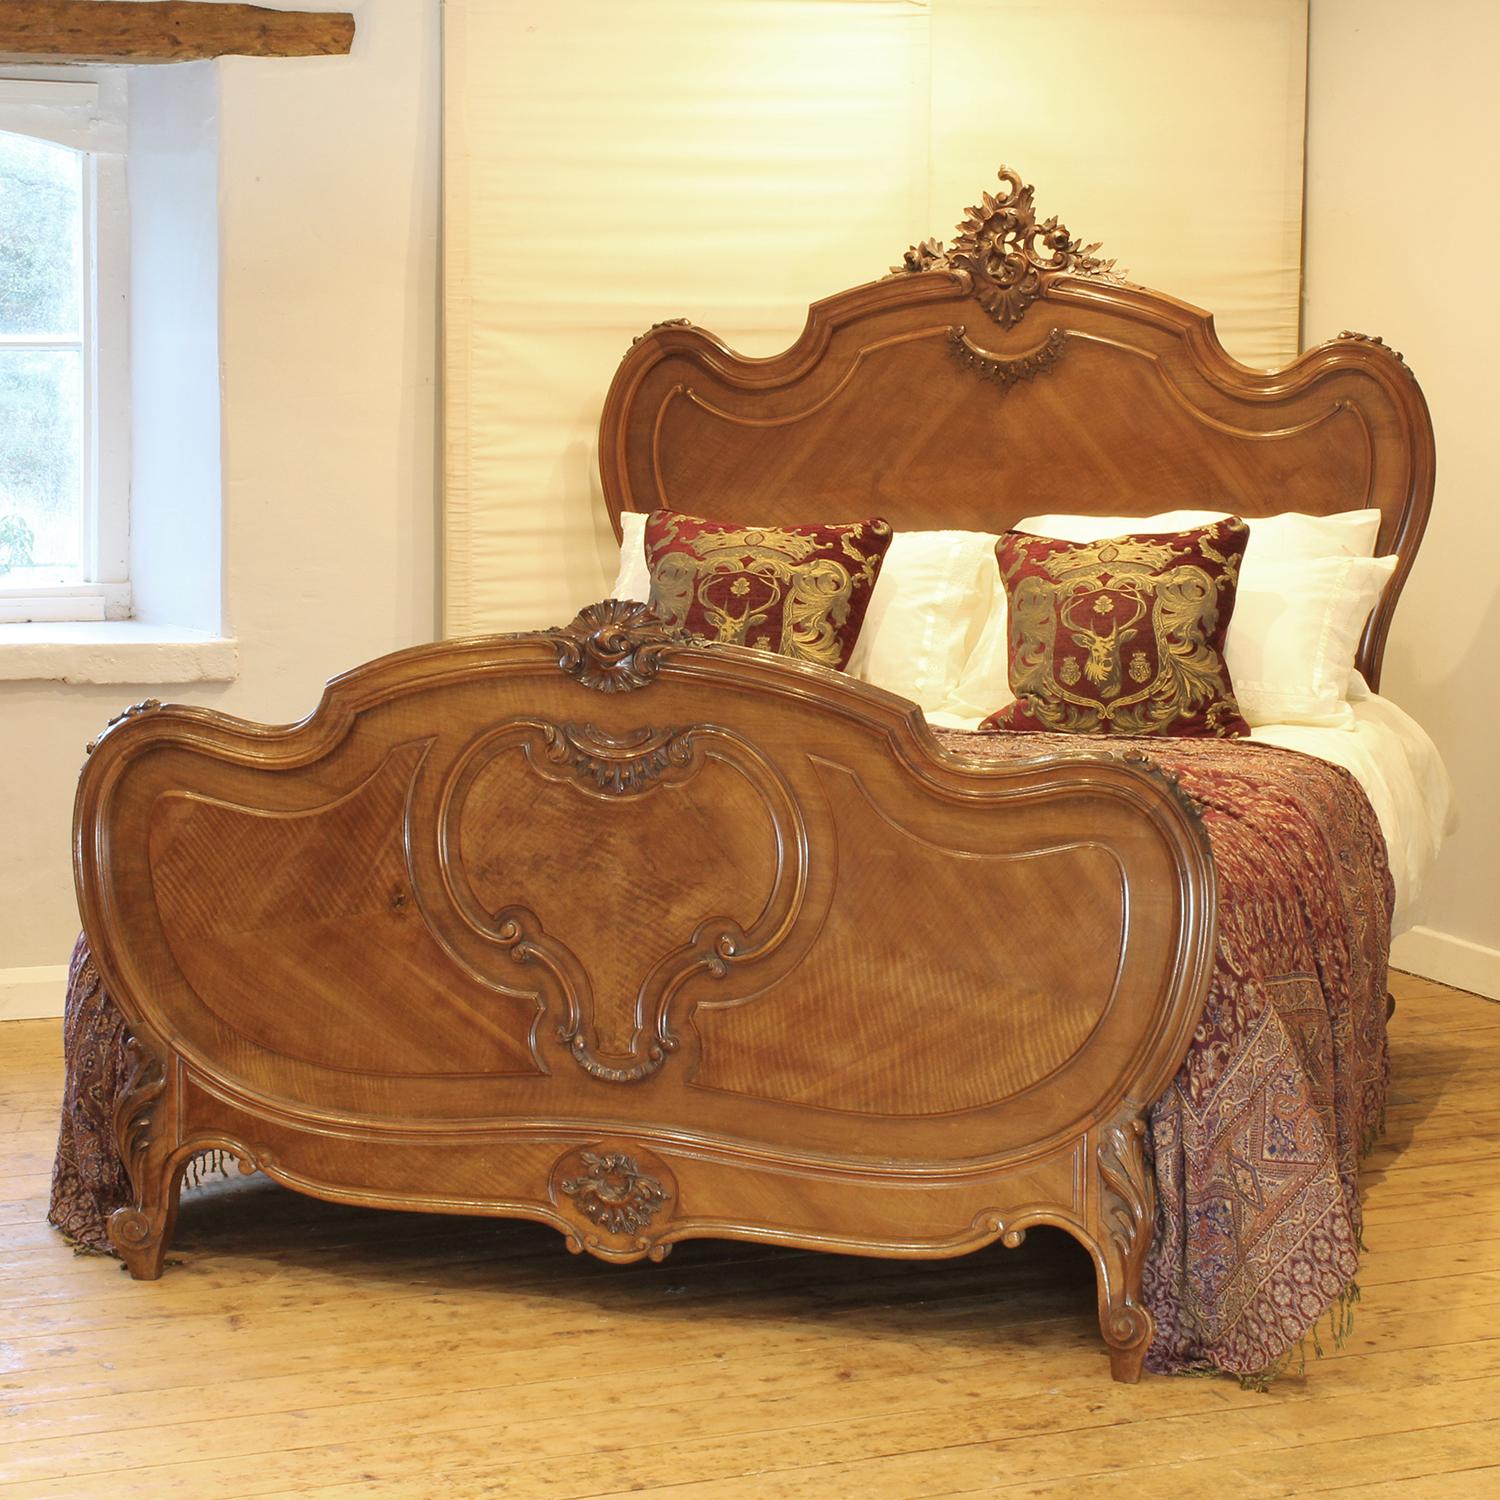 A Louis XV style antique bed in walnut with rococo shaping and fine carving.

This bed accepts a British king size or American queen size, 5ft wide (60 inches or 150cm) base and mattress set, with an overlap (as shown)

The price includes a deep